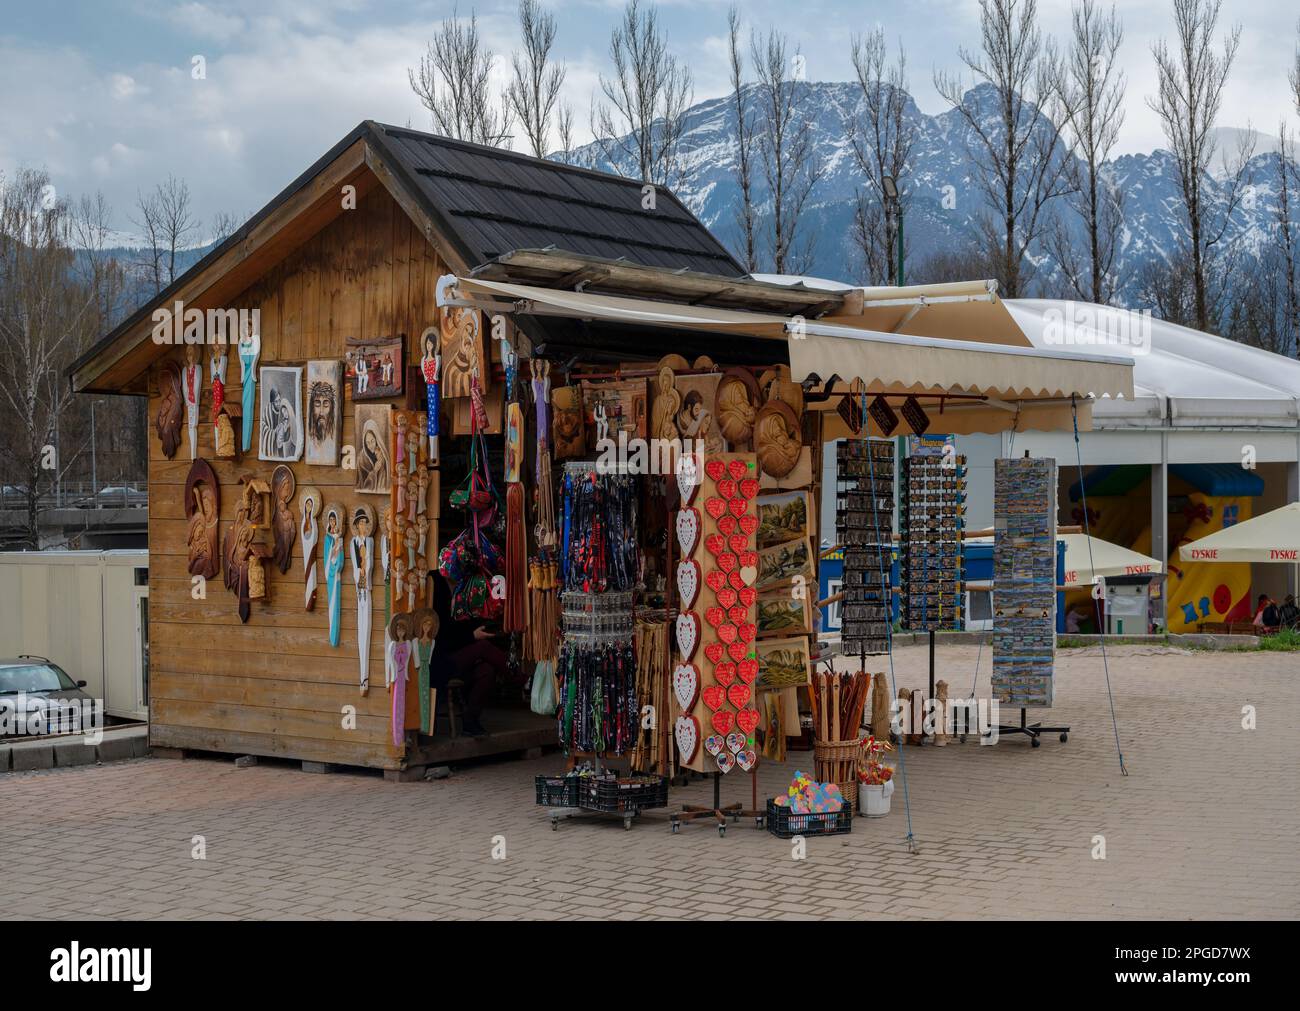 View of Souvenir shops on the streets selling winter clothes, colorful magnets, stuffed toys and collectibles captured at Zakopane, Poland. Stock Photo